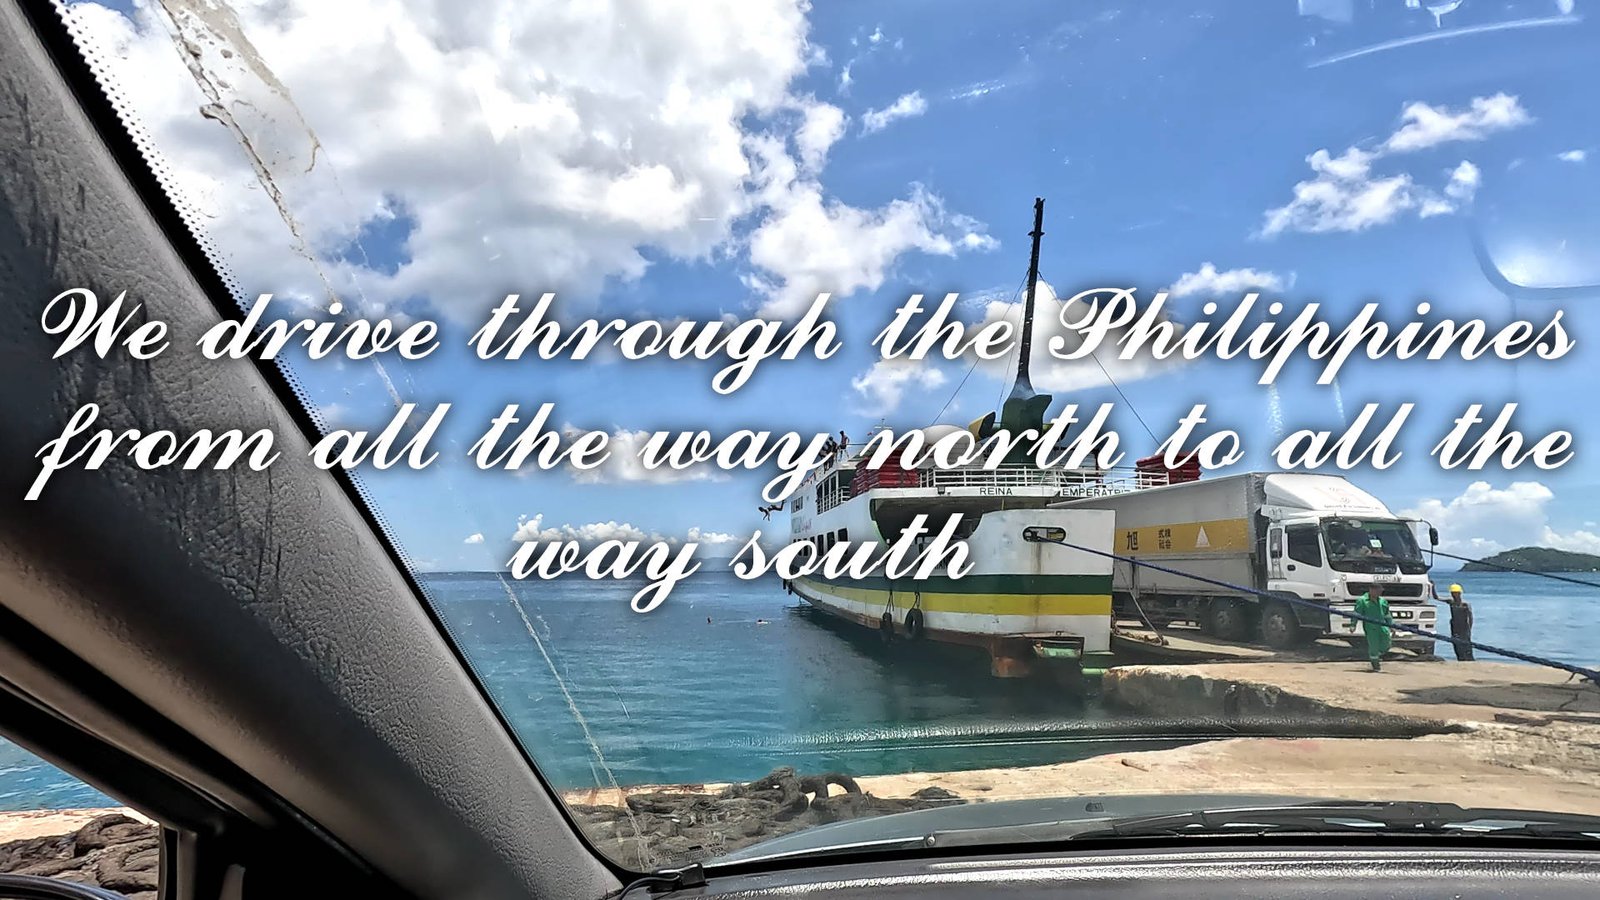 Our drive through the Philippines